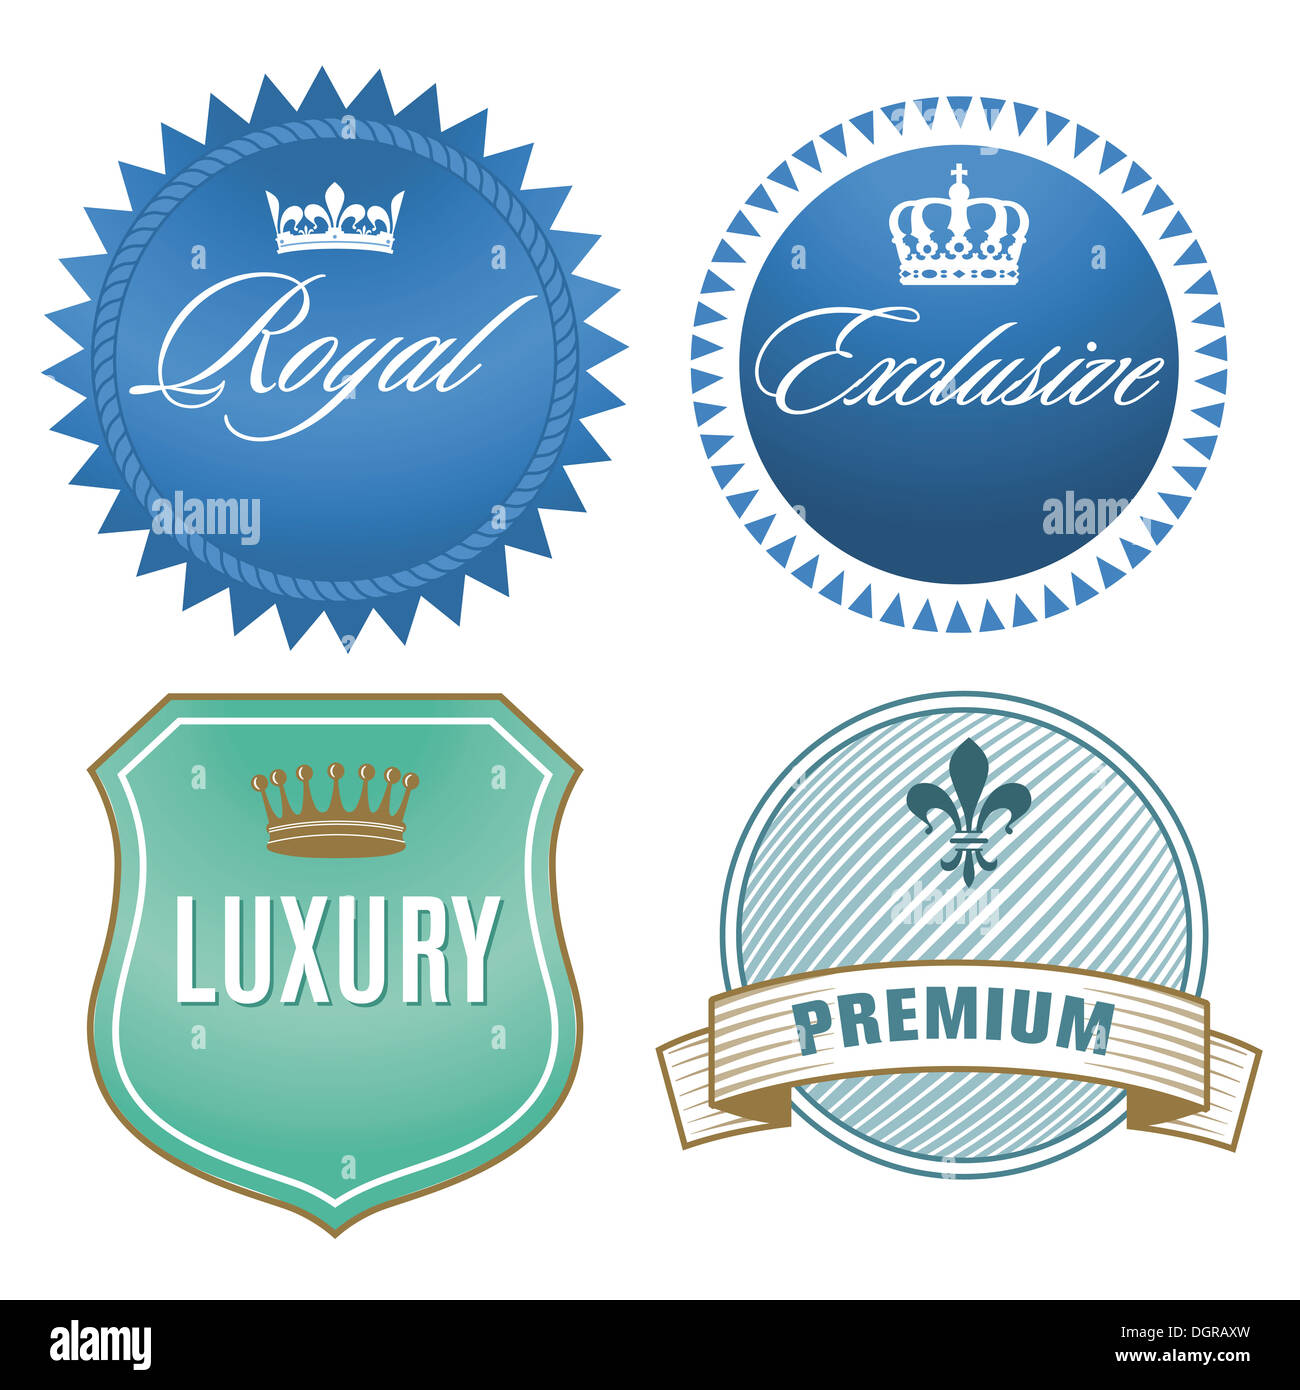 Luxury labels with crown  Crest Stock Photo